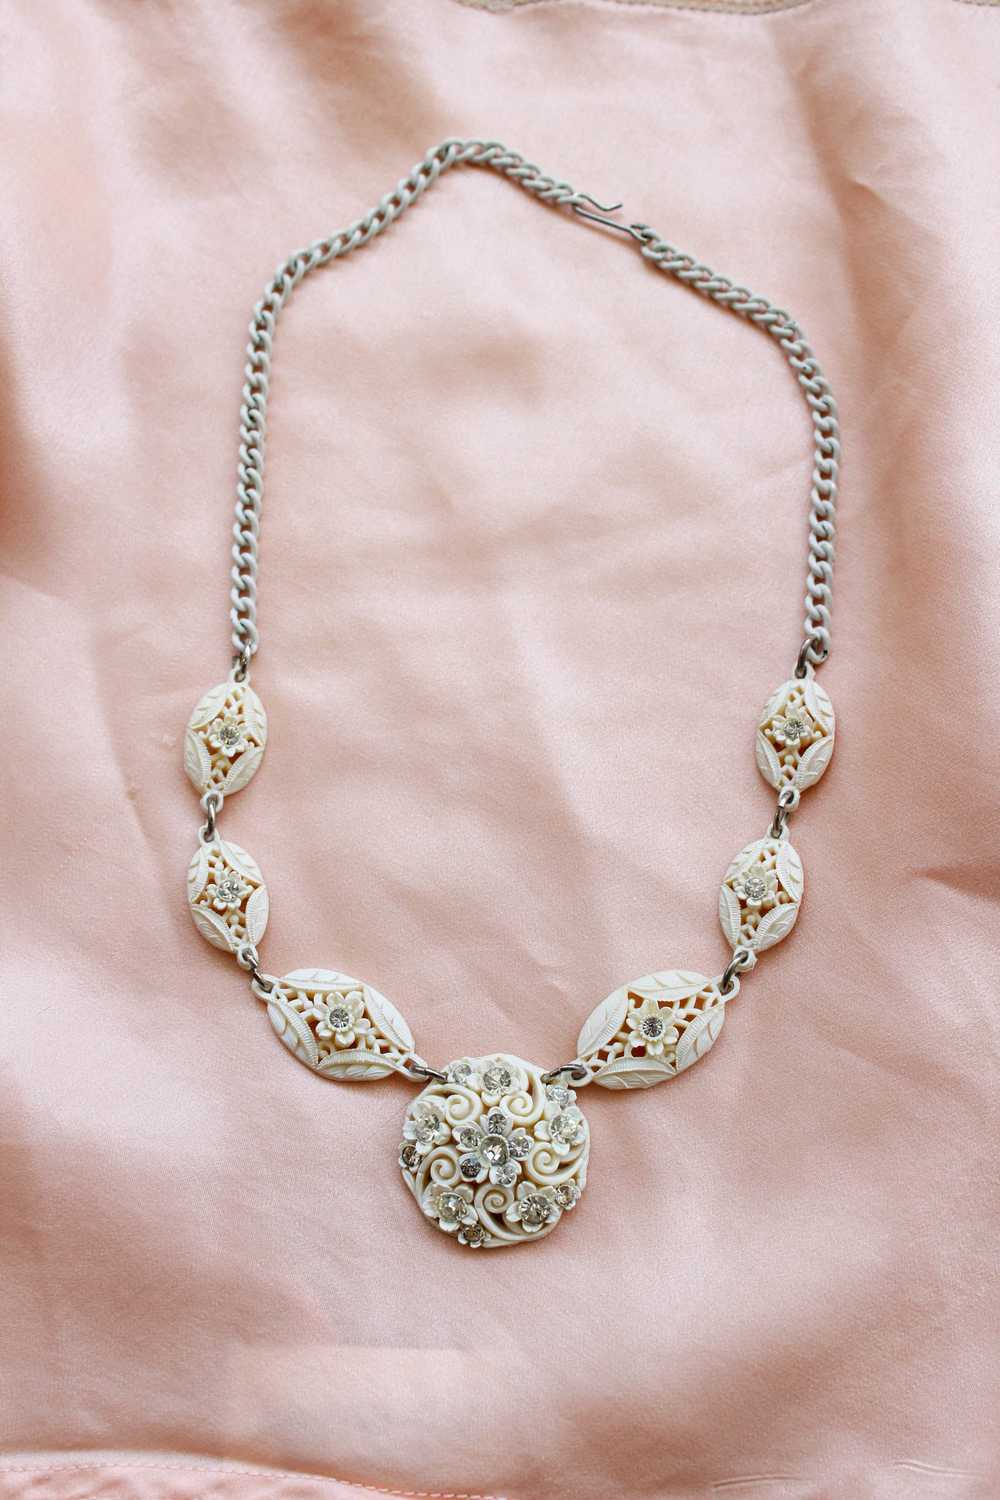 1950s White Carved Celluloid Rhinestone Necklace - image 4